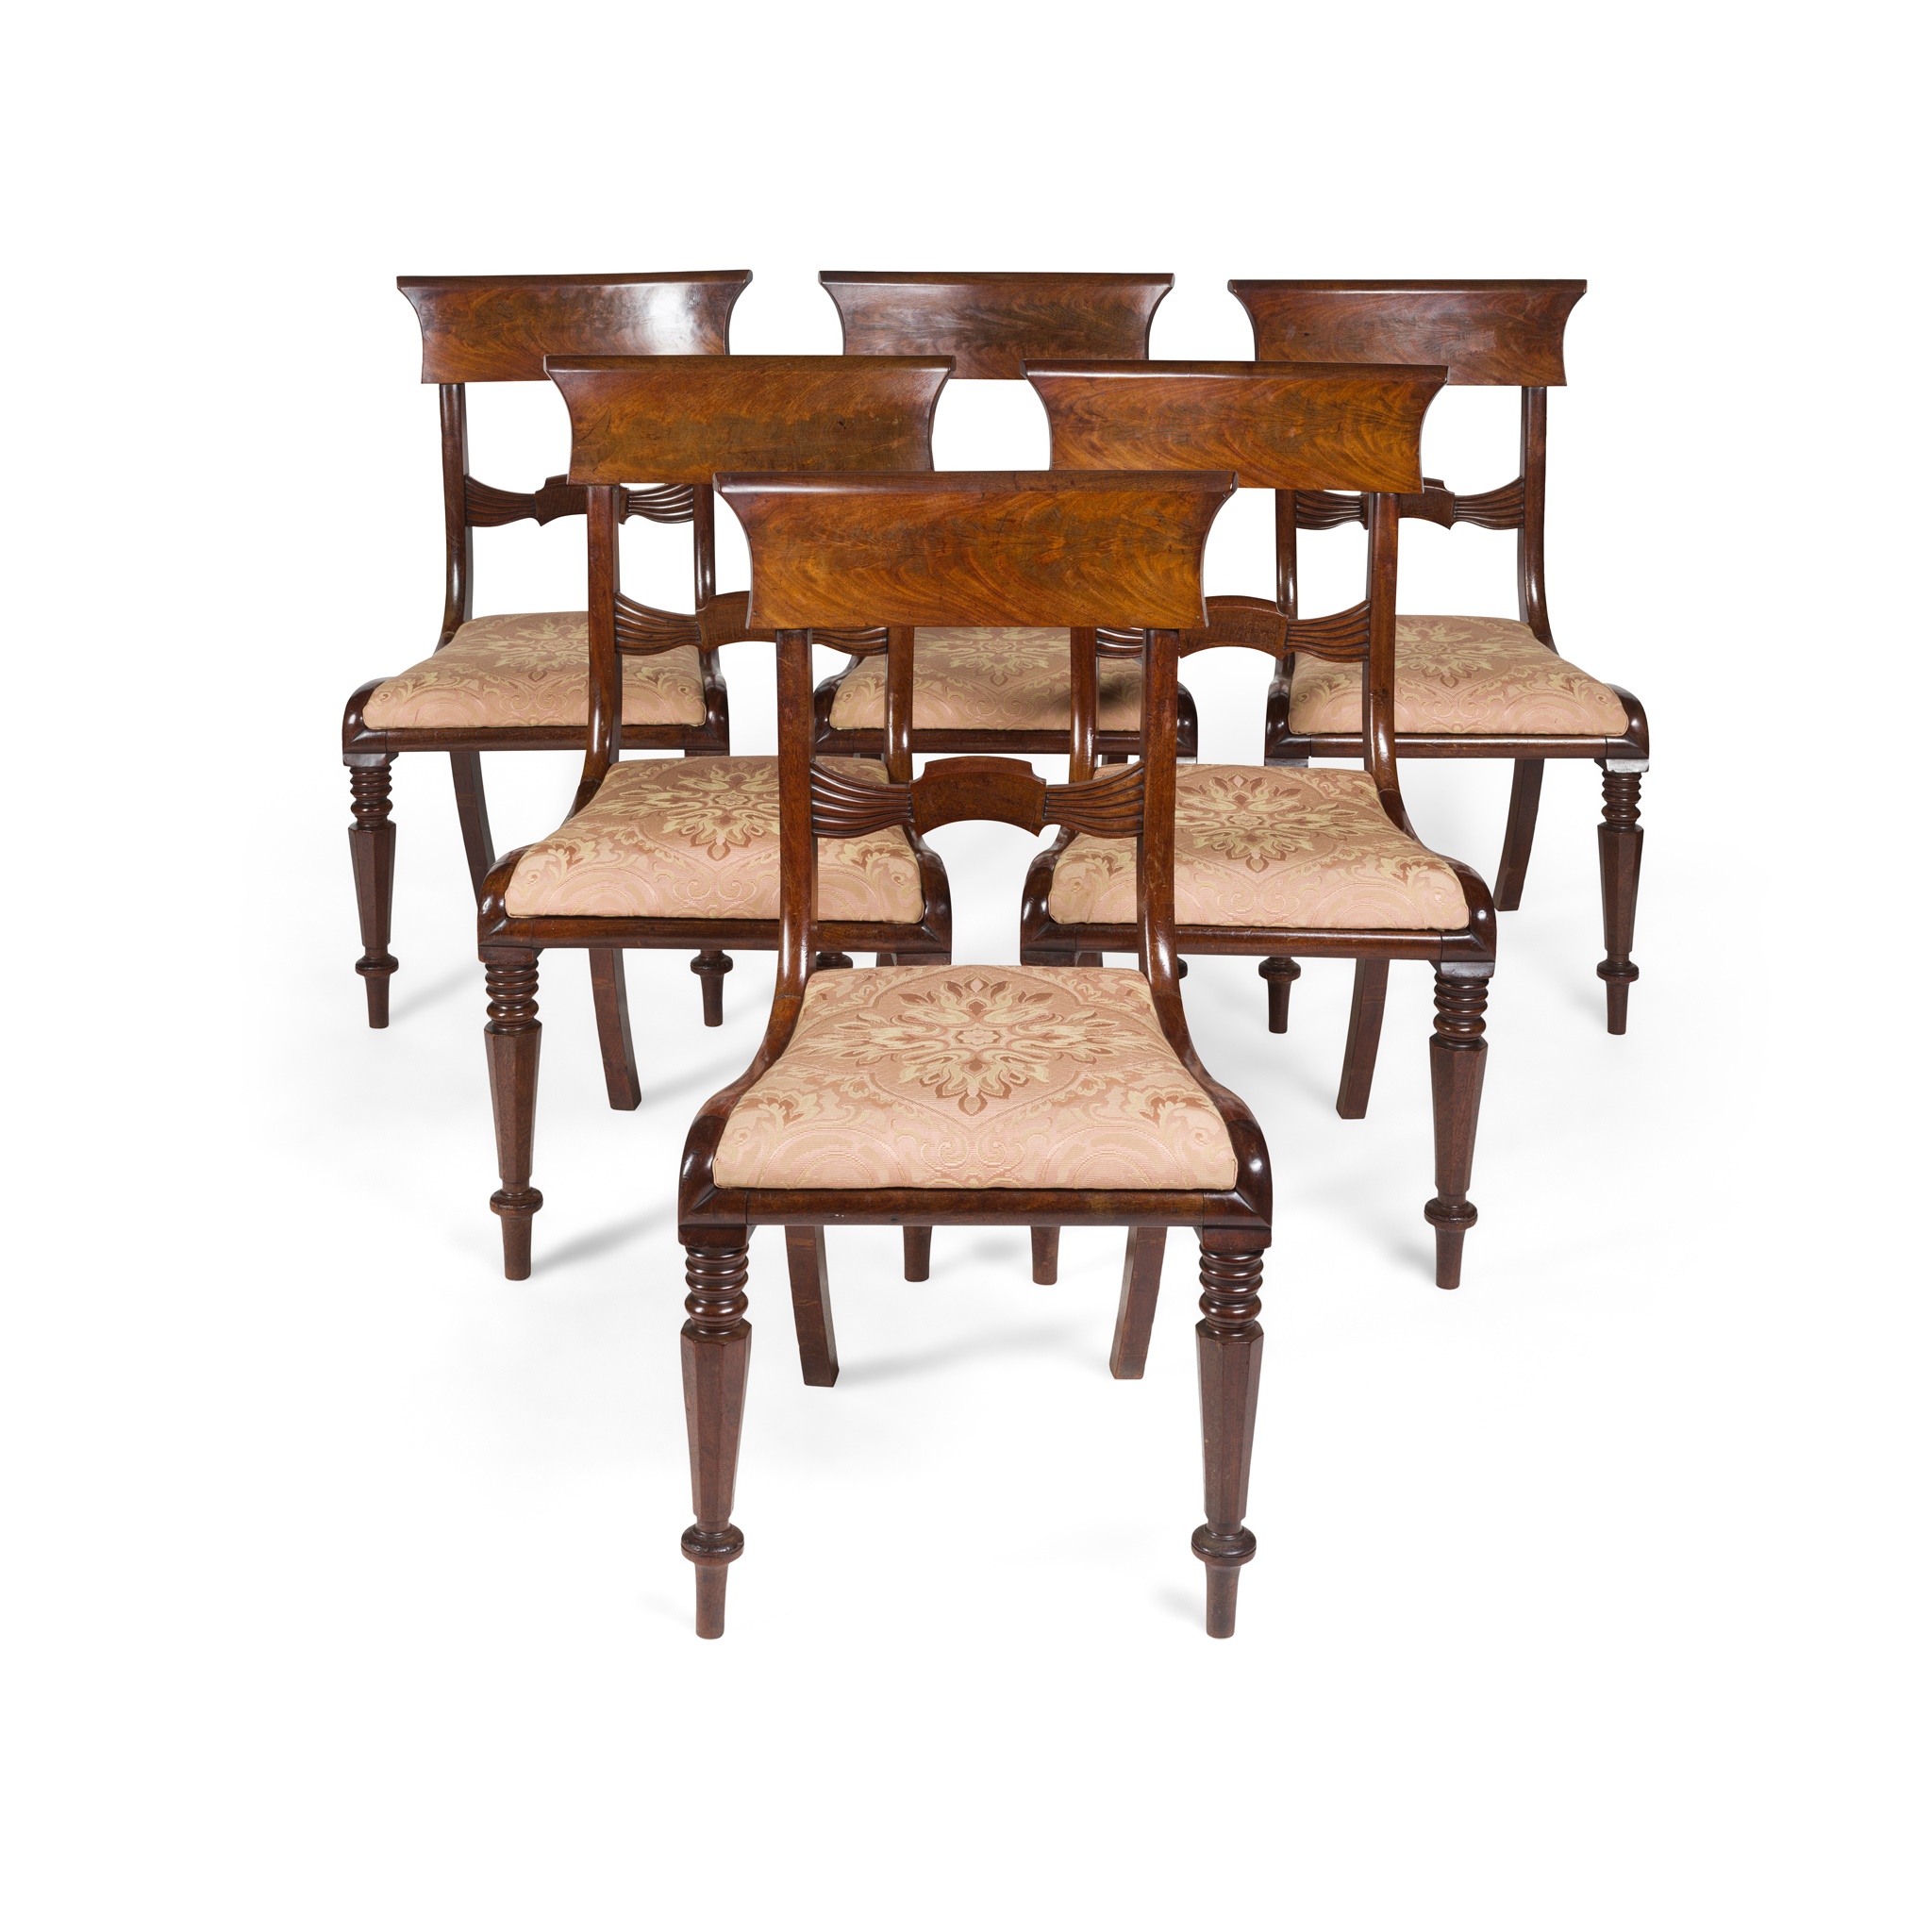 SET OF EIGHT GEORGE IV MAHOGANY DINING CHAIRS EARLY 19TH CENTURY